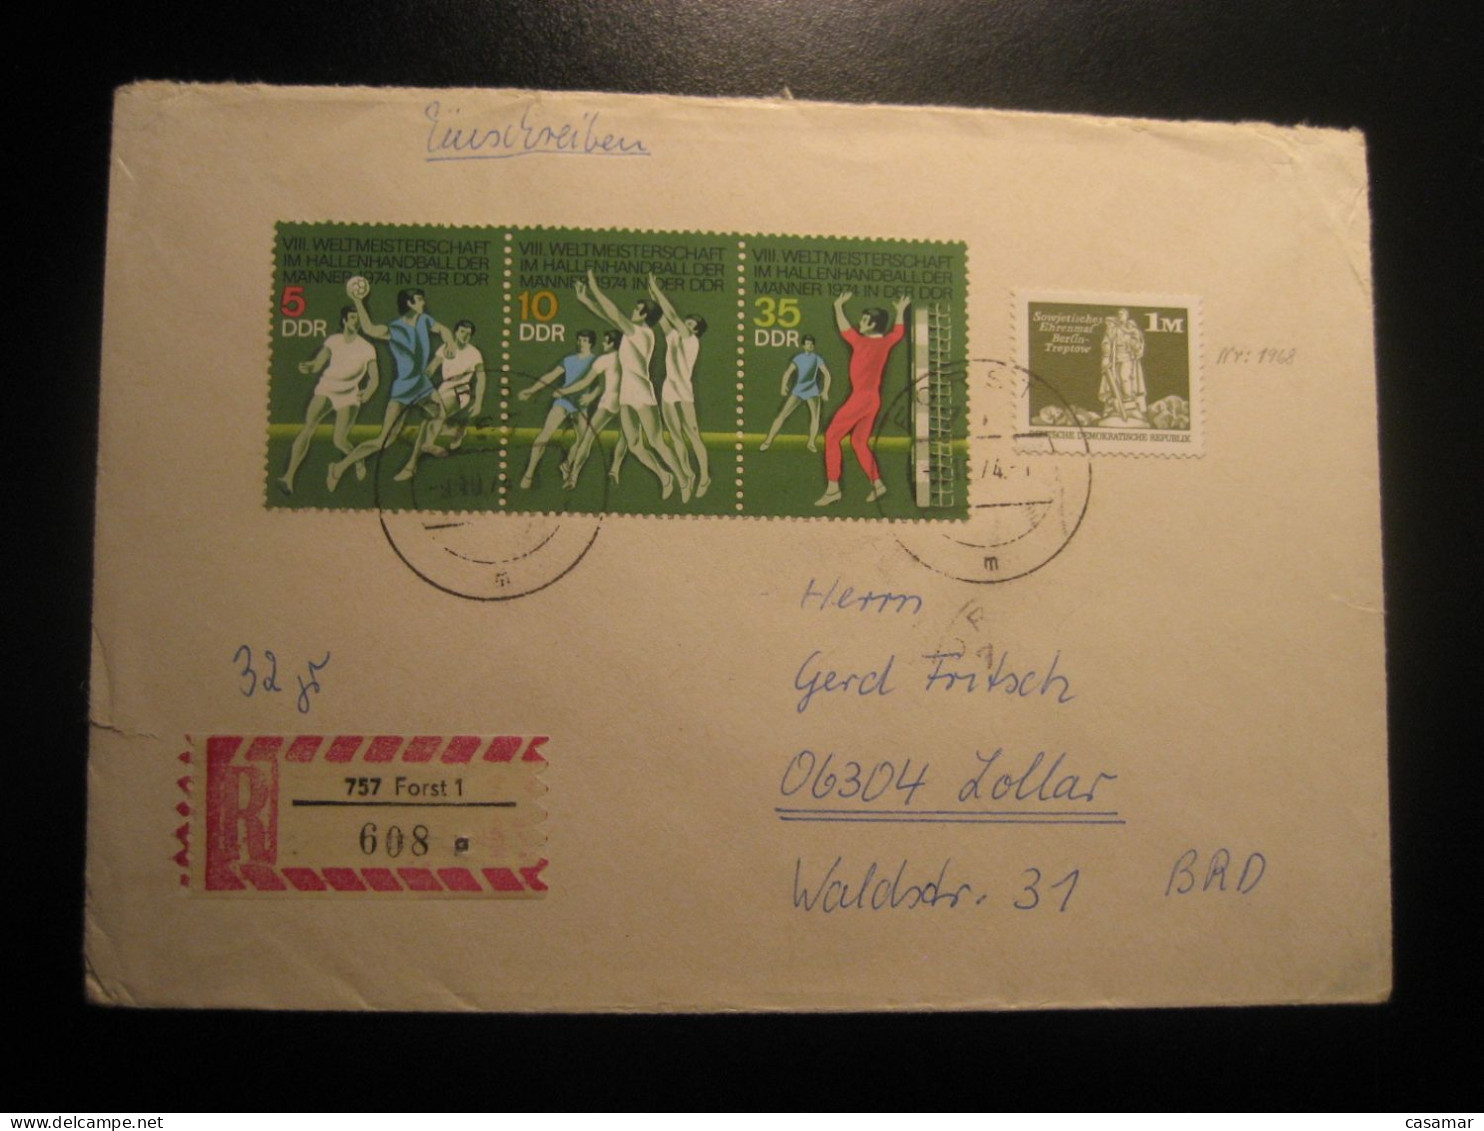 FORST 1974 Handball World Championship Balonmano Stamps On Registered Cover Tauschsendung ZKPH Label DDR GERMANY - Balonmano